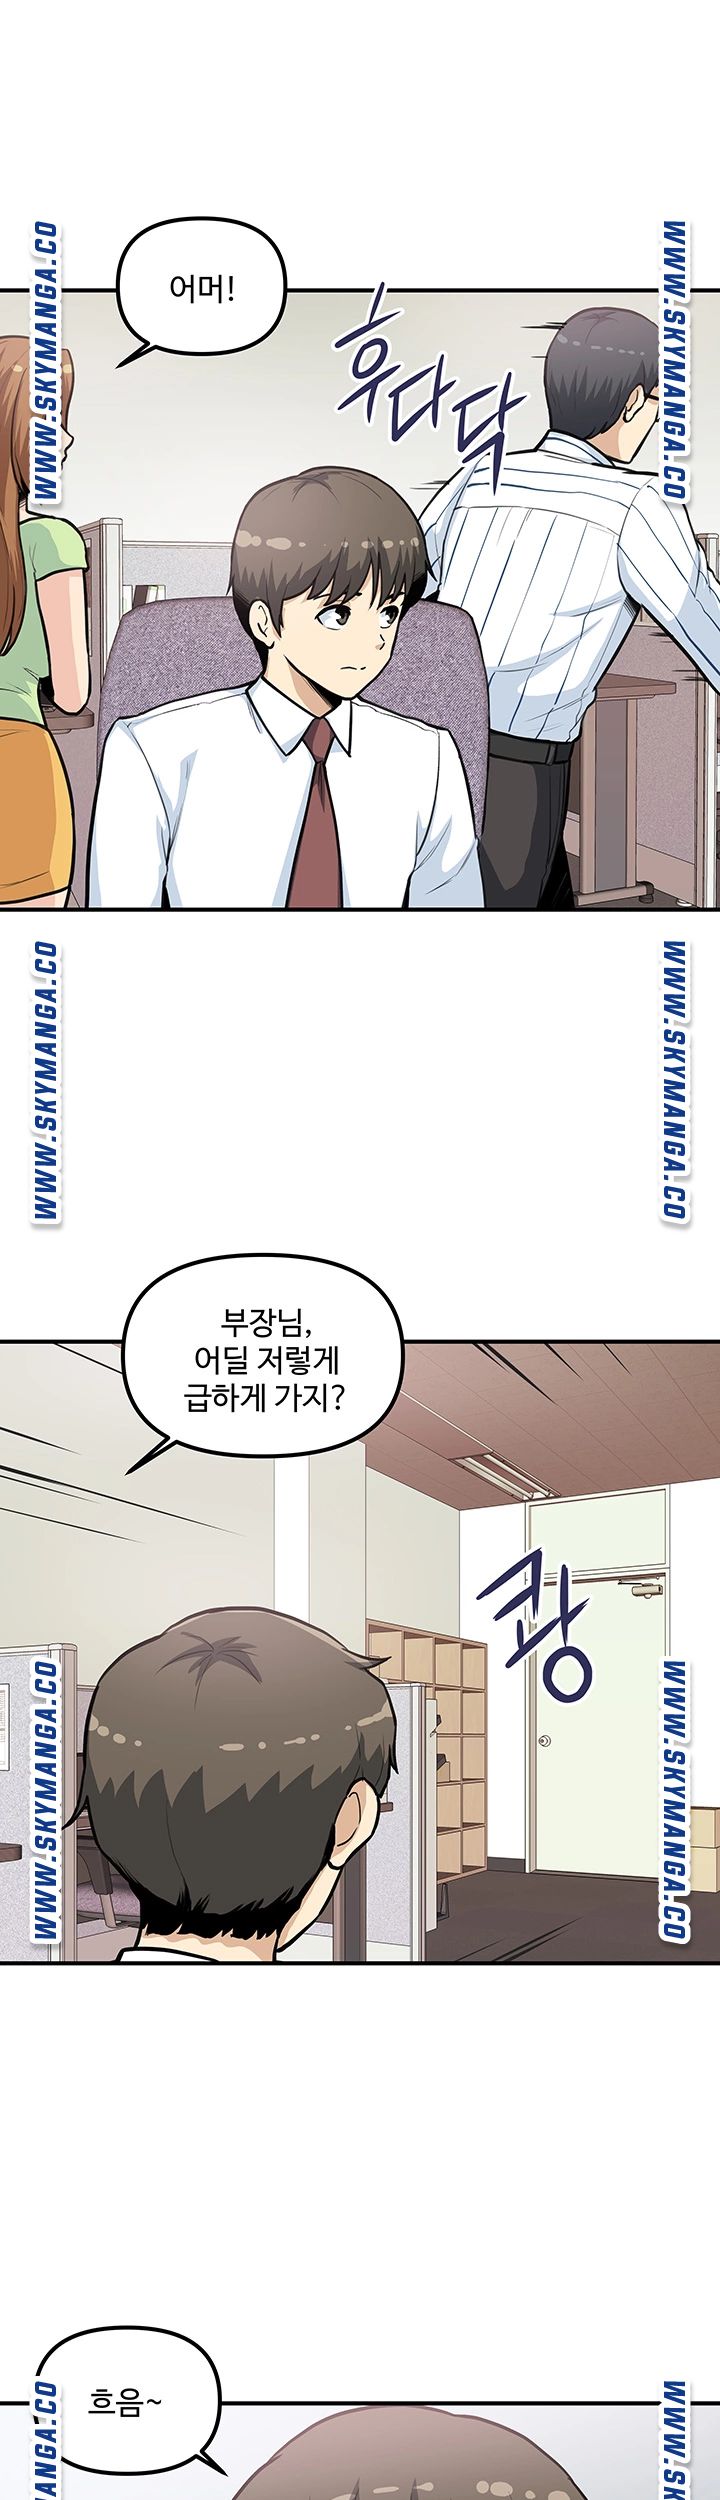 Office Bible Raw - Chapter 25 Page 13